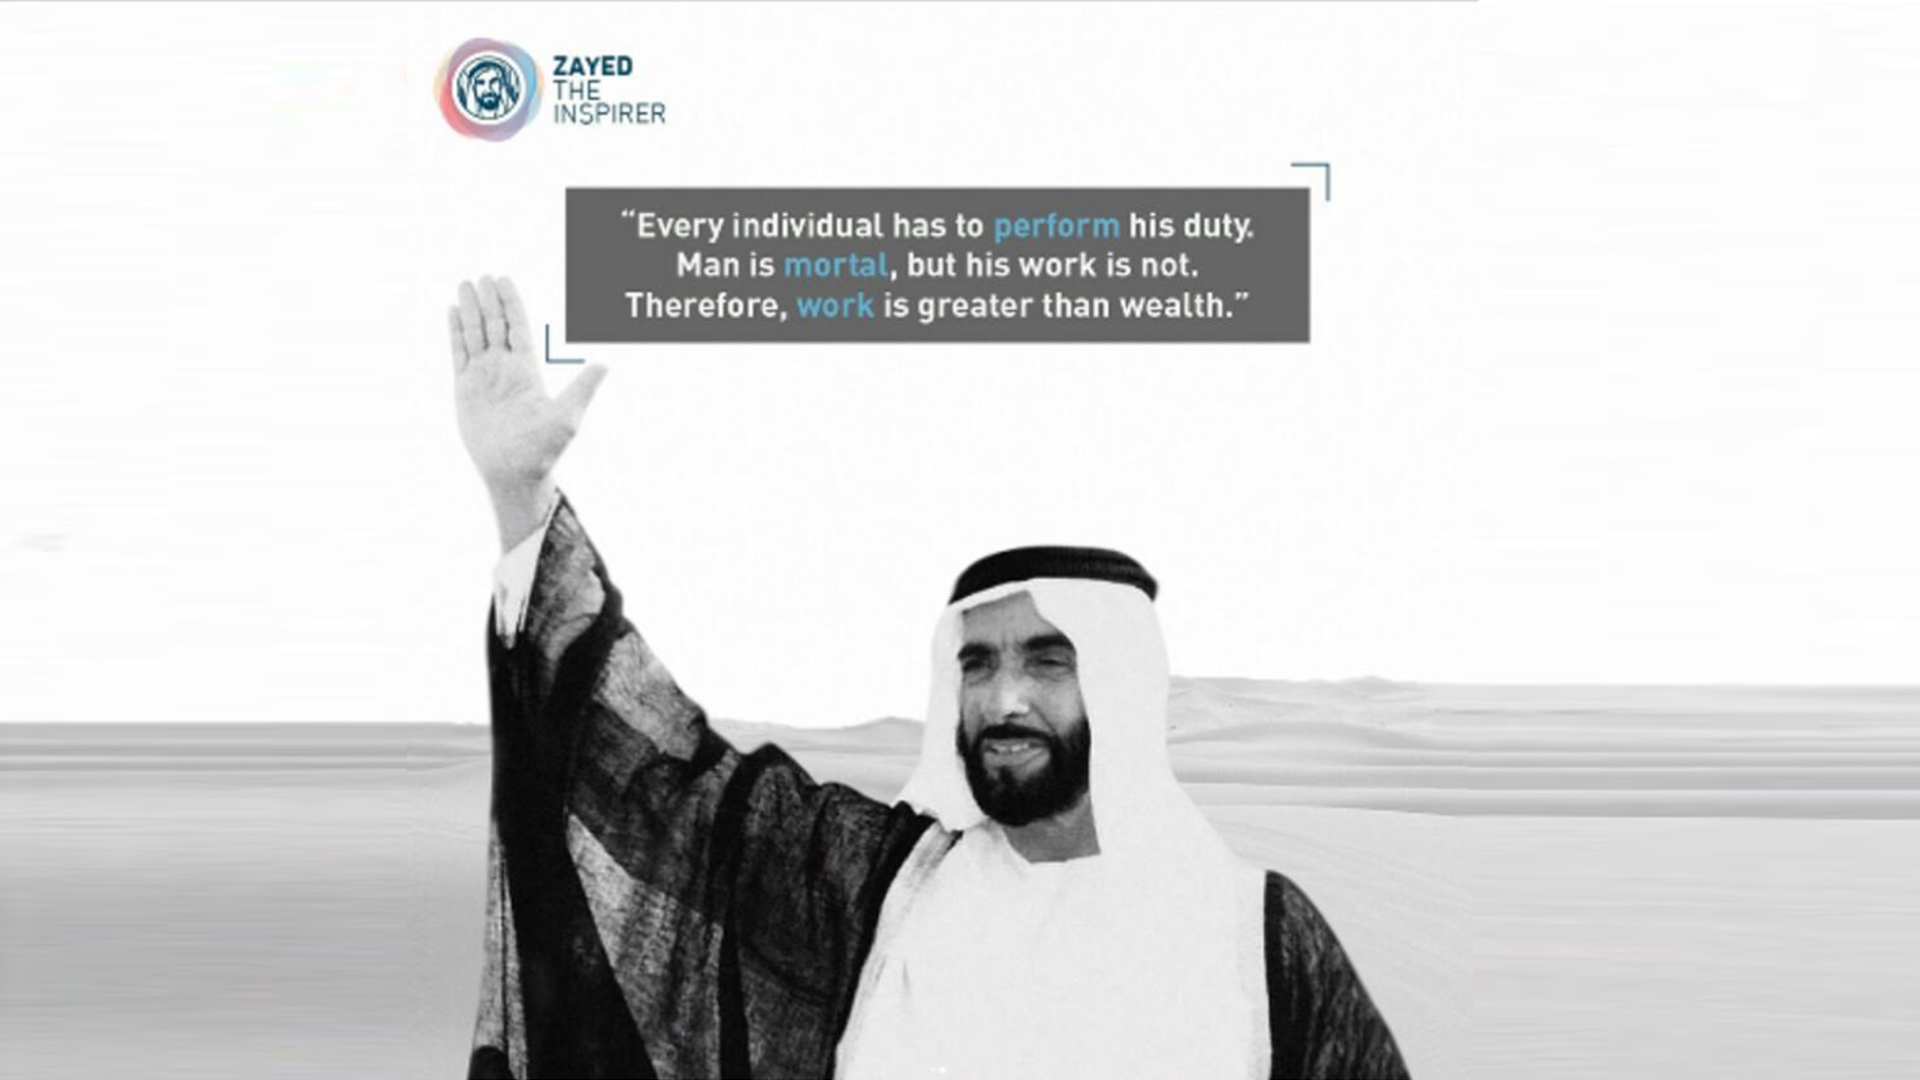 UAE: ‘ZAYED THE INSPIRER’ PLATFORM LAUNCHED TO MARK CENTENNIAL BIRTH ANNIVERSARY OF BABA ZAYED